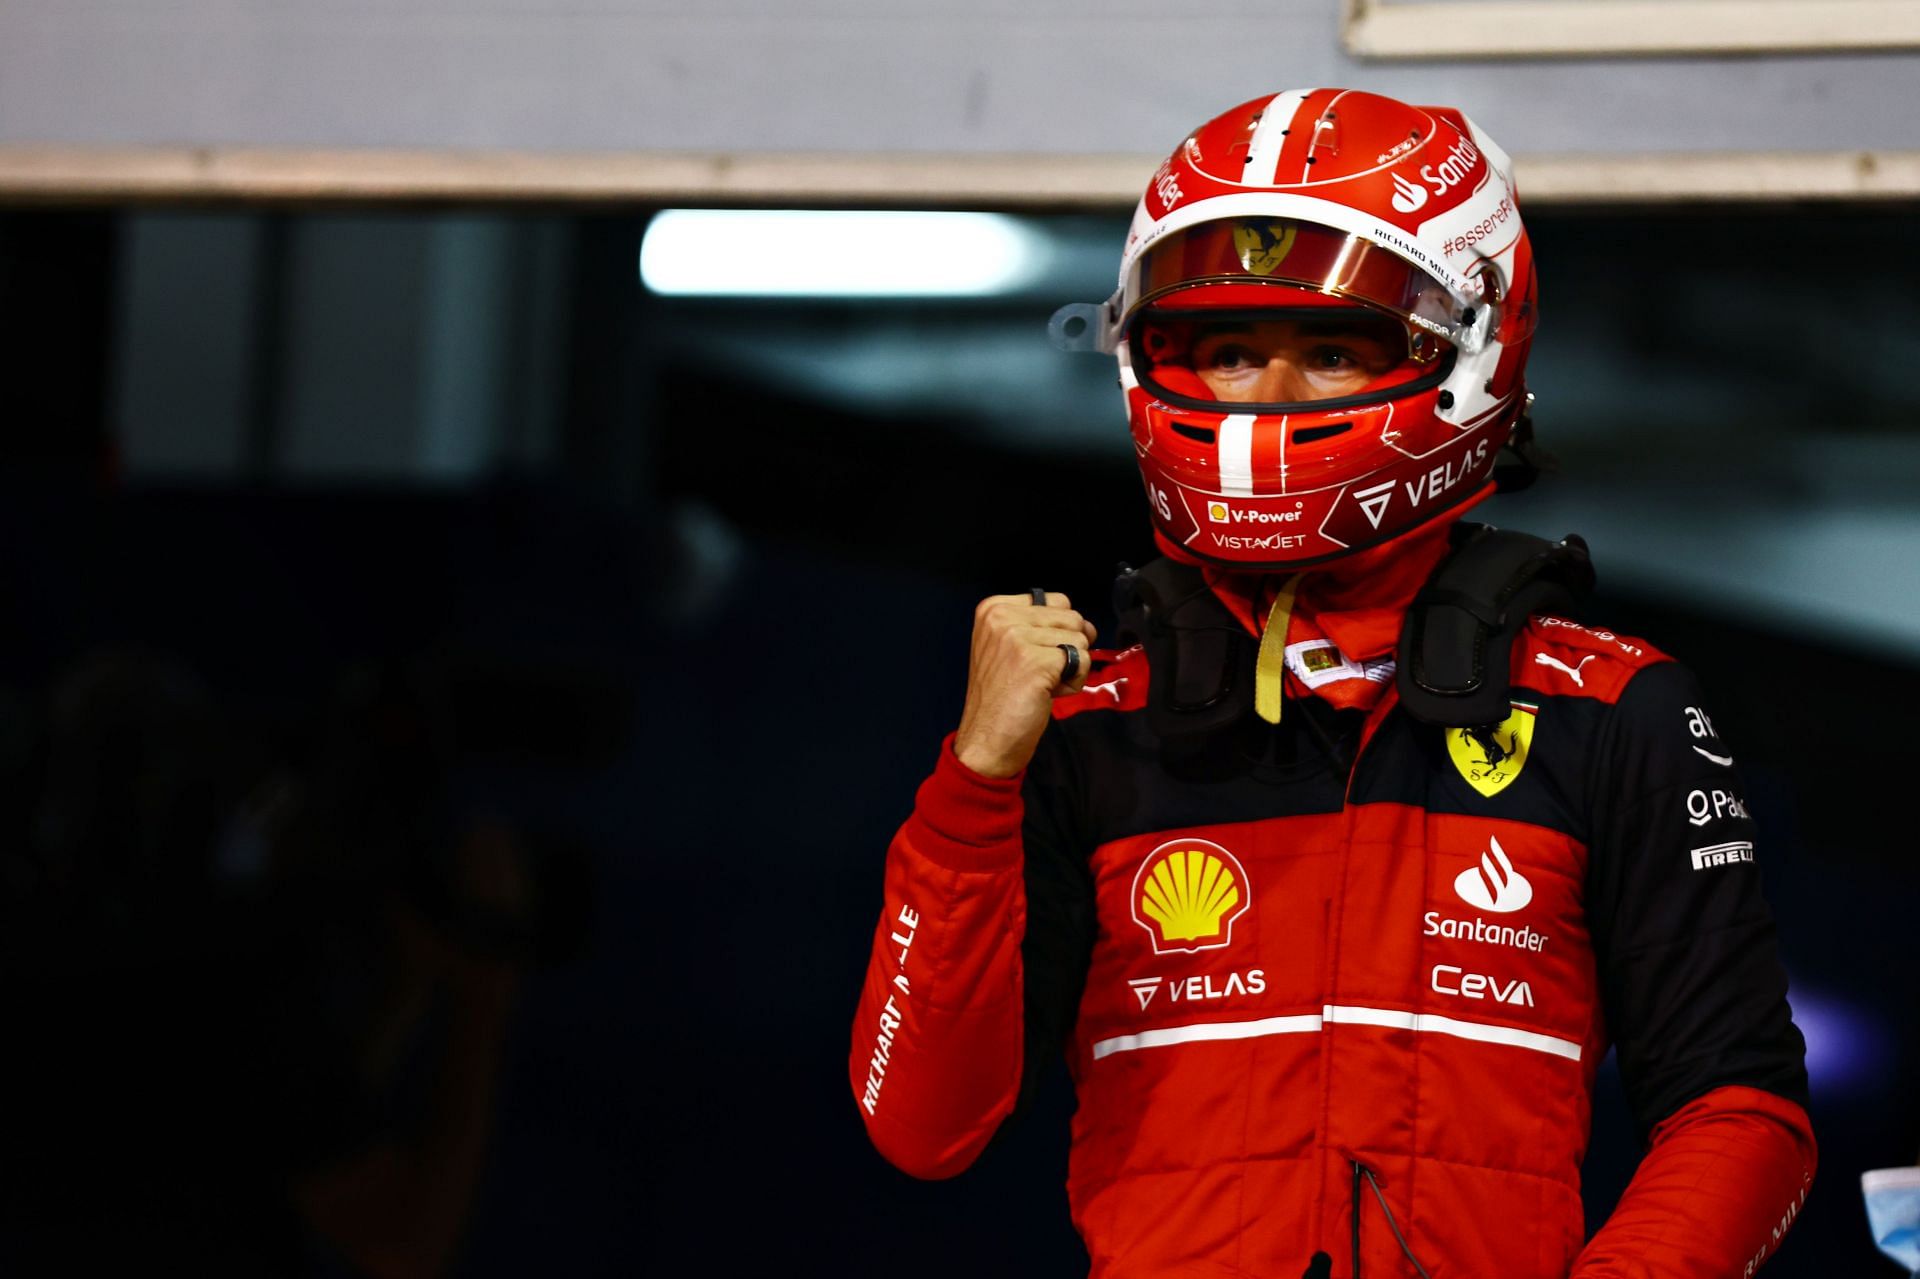 Charles Leclerc took pole at the F1 Grand Prix of Bahrain - Qualifying